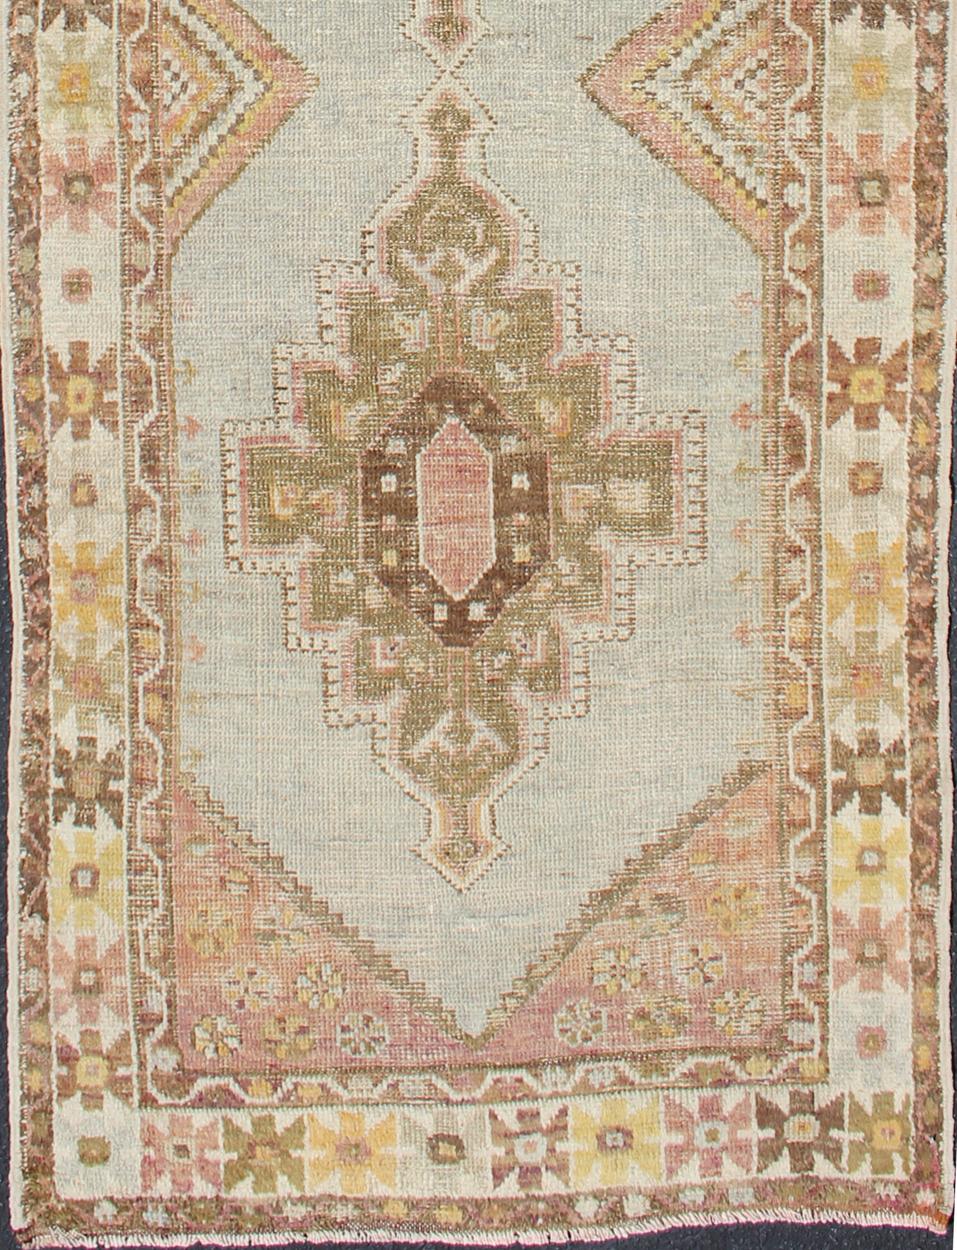 Coral, ice blue, brown and olive-toned Oushak runner from Turkey, rug tu-TRS-136583, country of origin / type: Turkey / Oushak, circa 1920

This antique Oushak runner from Turkey features three layered medallions spread across its center field,